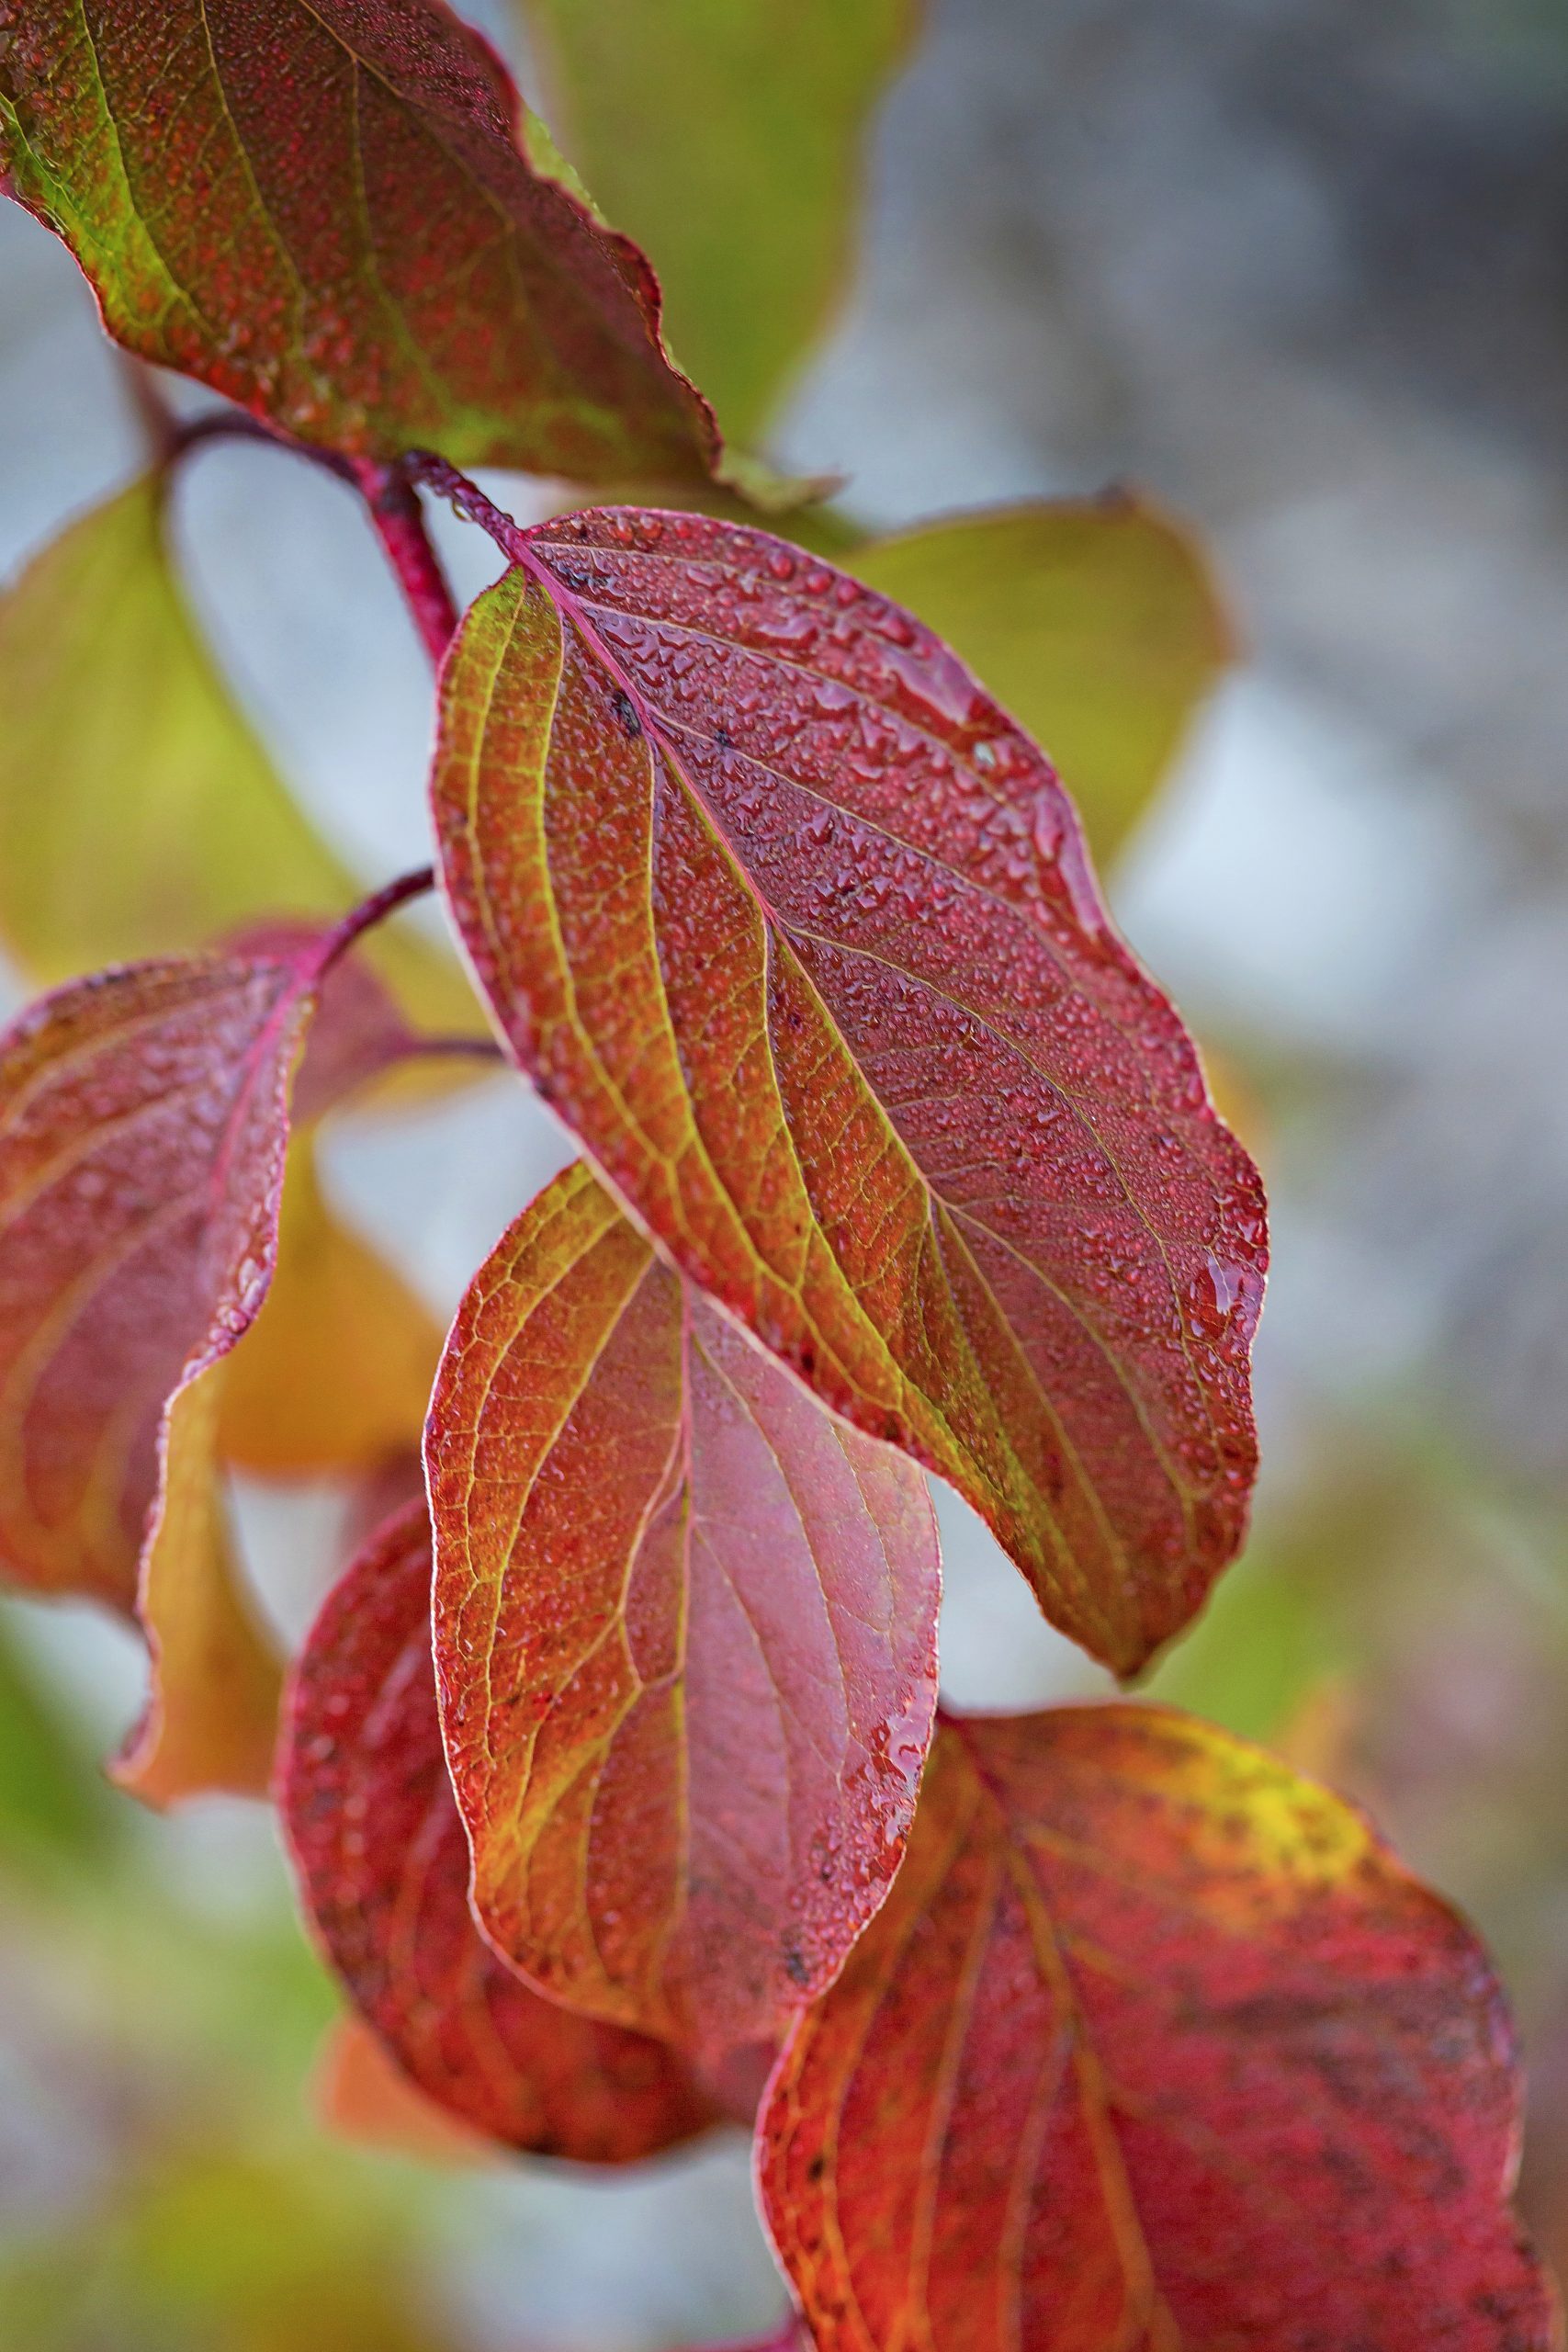 Image of Silky dogwood leaves in fall